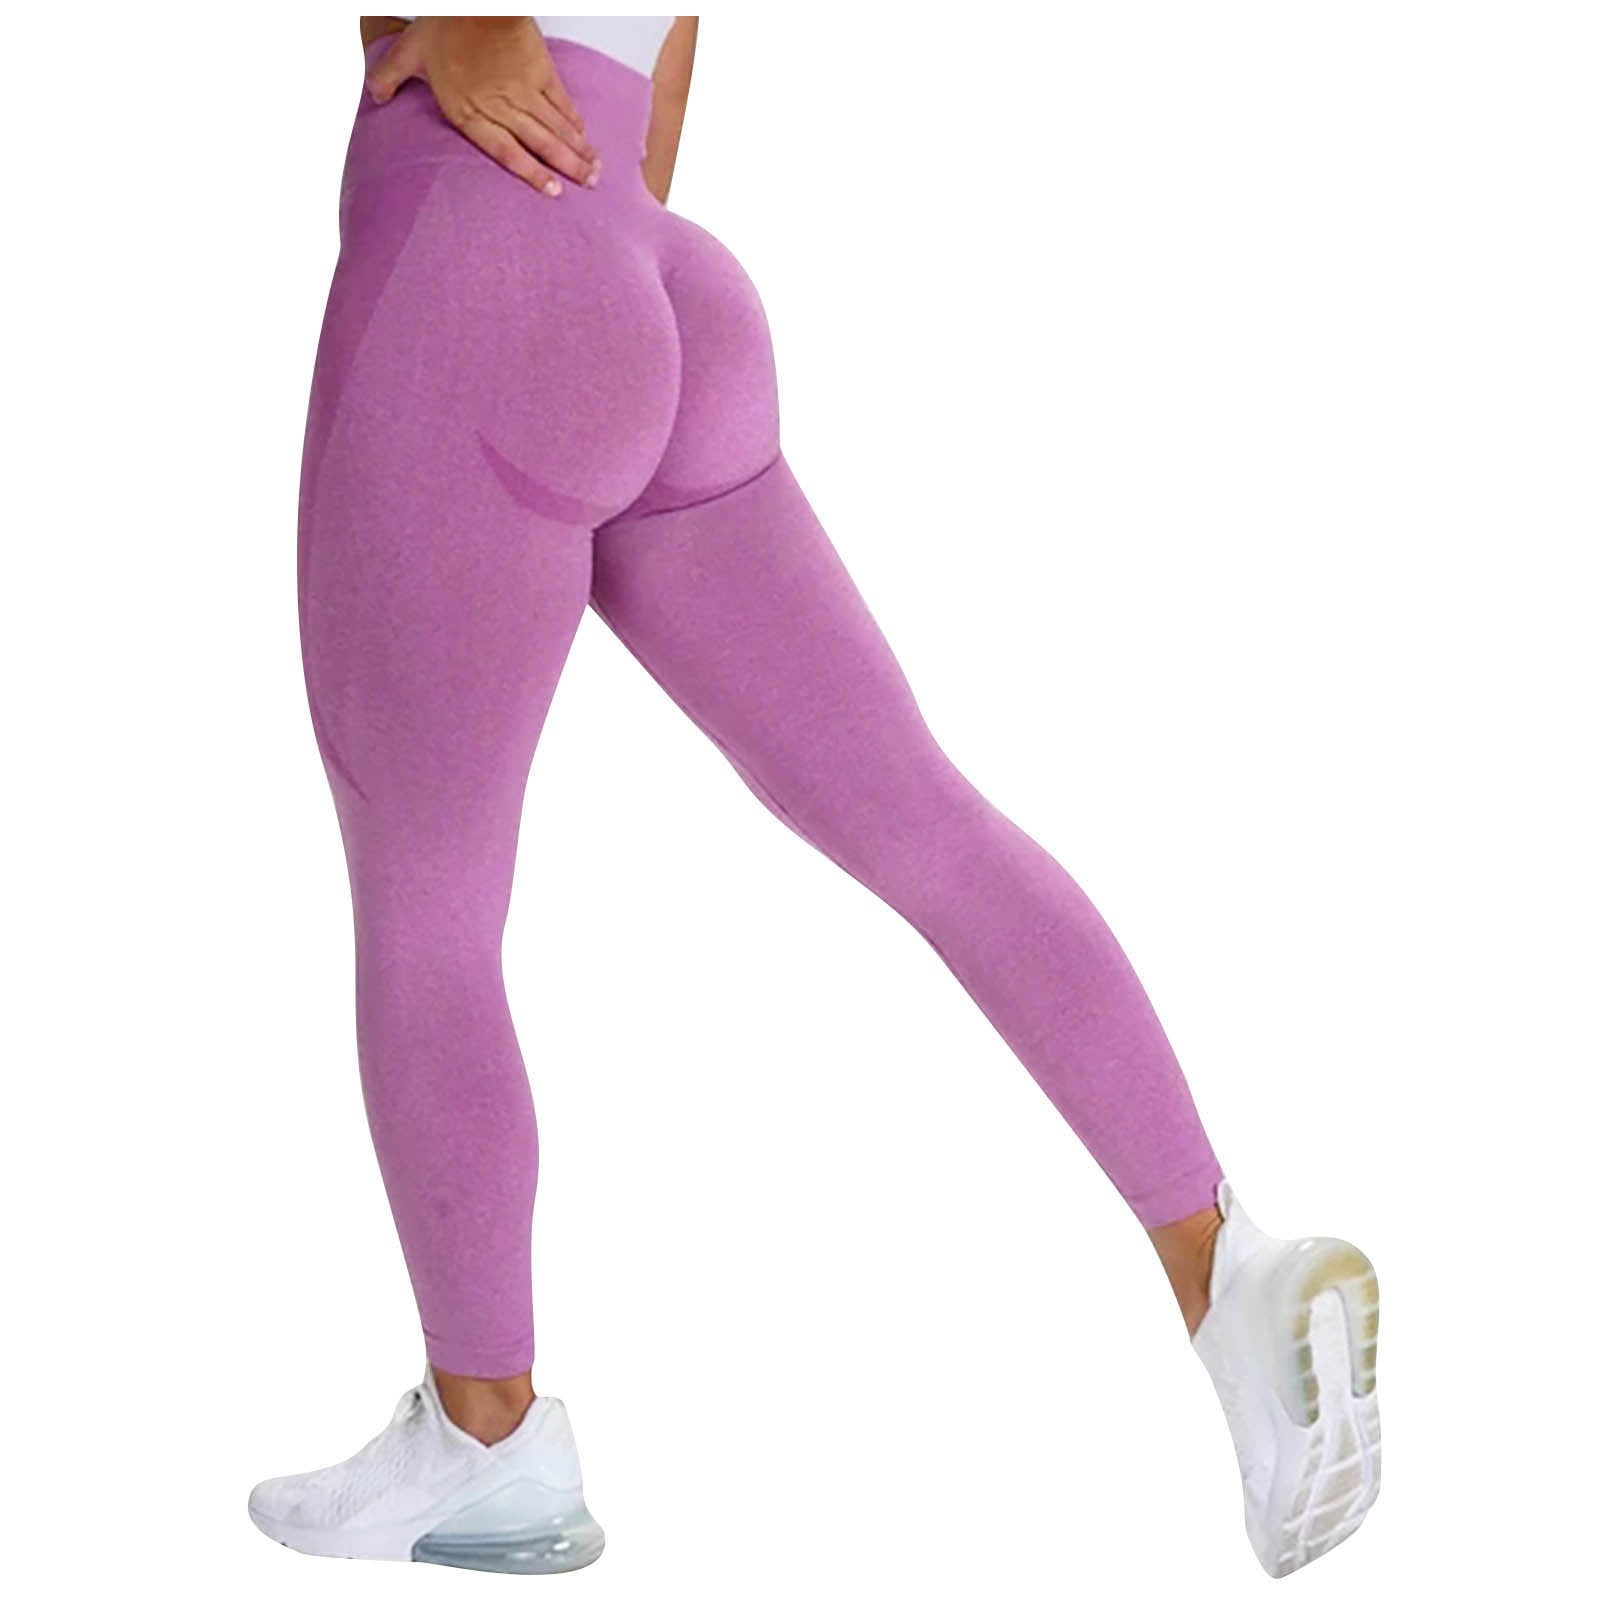 REORIAFEE Workout Leggings Yoga Pants Plus Size for Women Butt Lifting Leggings  Tights Casual Yoga Pants High Waist Loose Straight Long Pants Hot Pink XL 